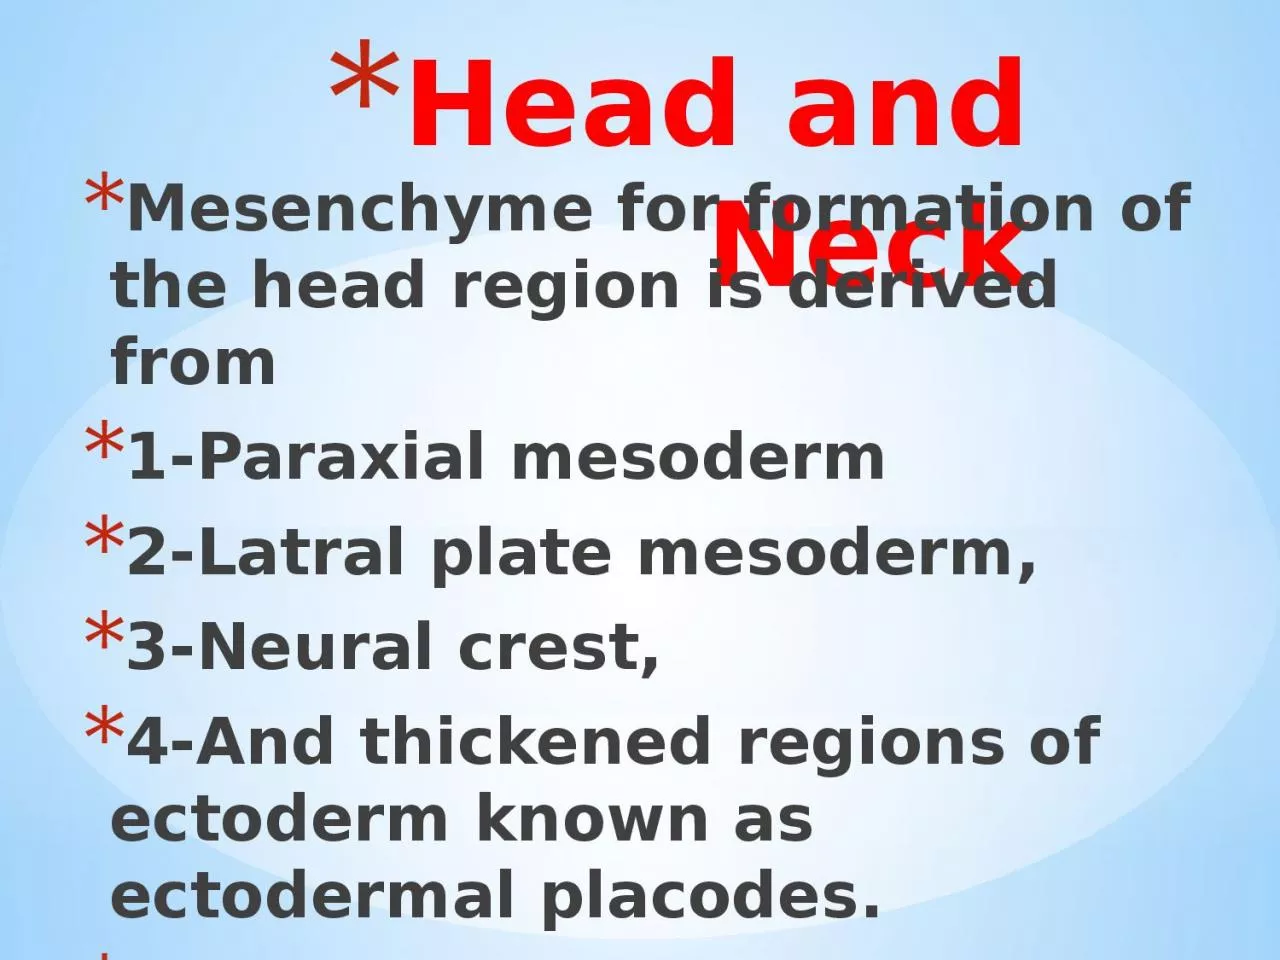 Head and Neck Mesenchyme for formation of the head region is derived from